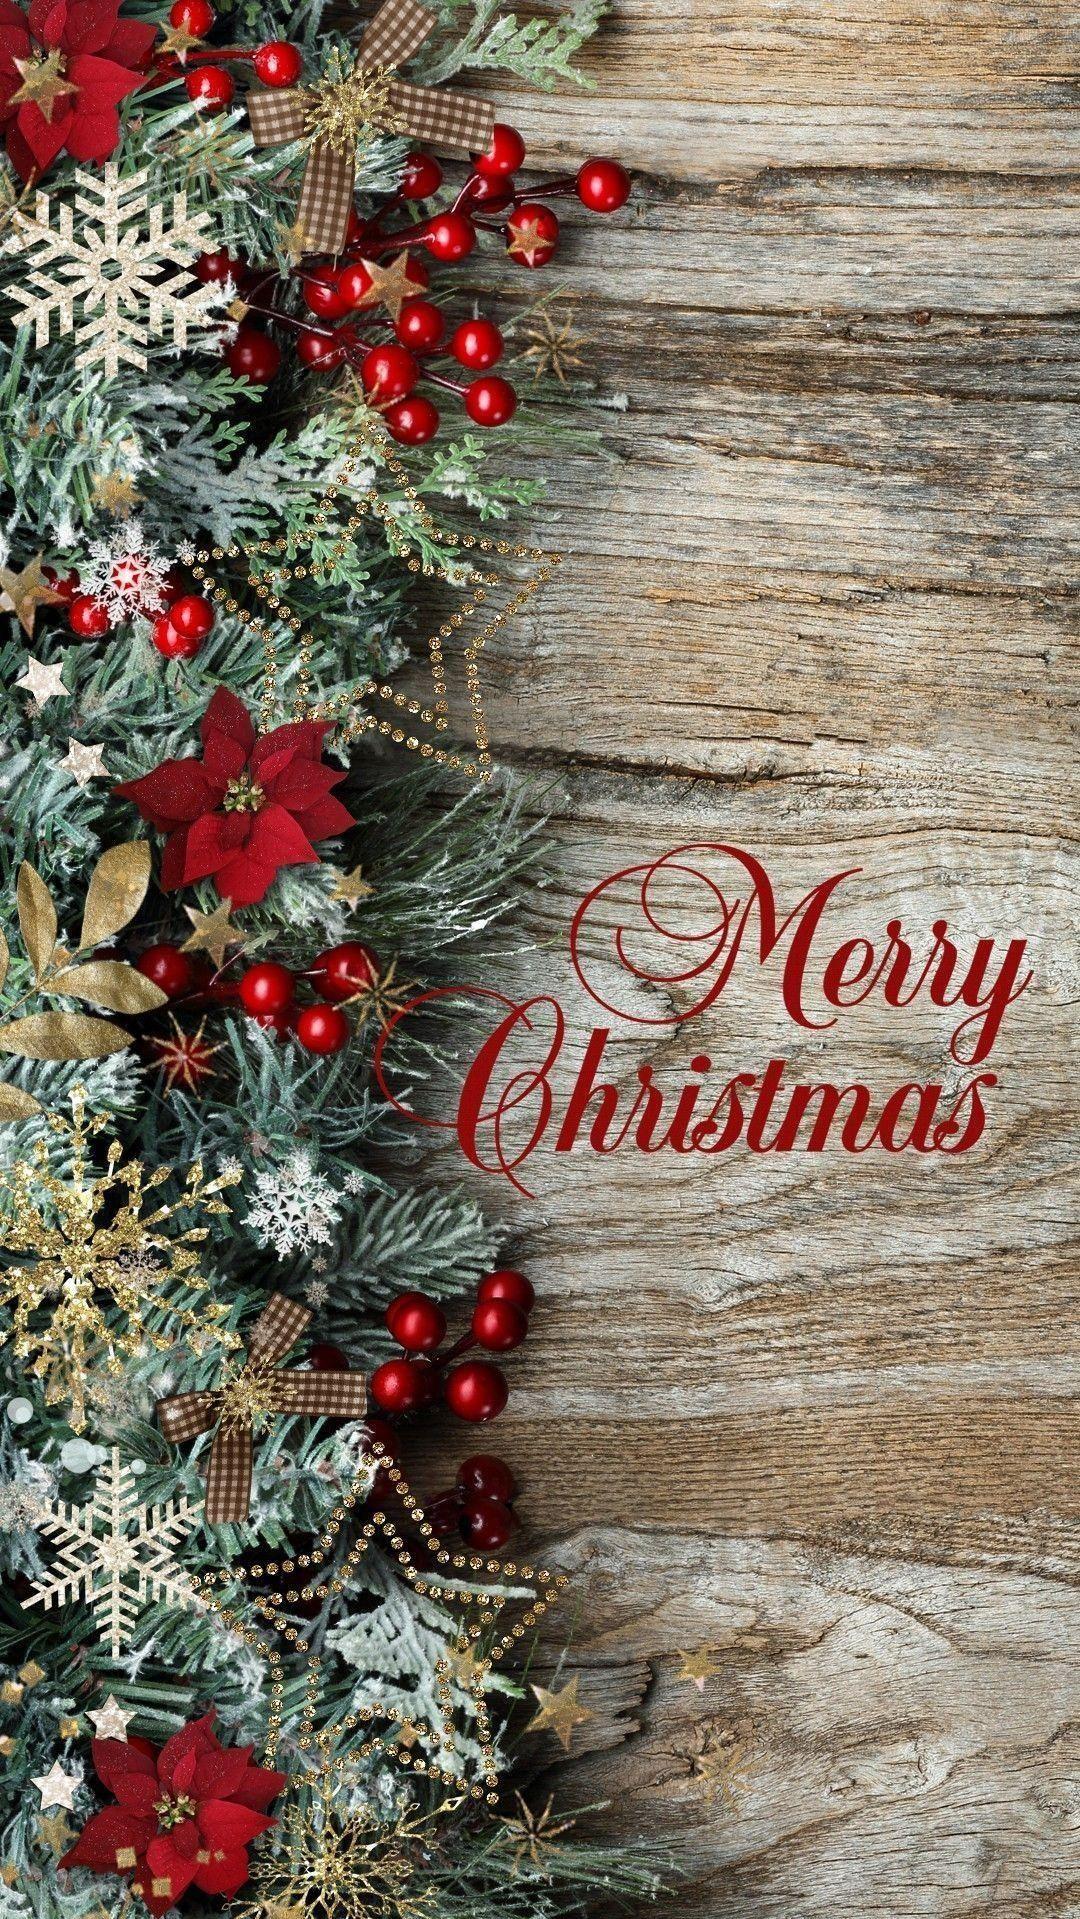 Christmas Wishes Wallpaper Merry